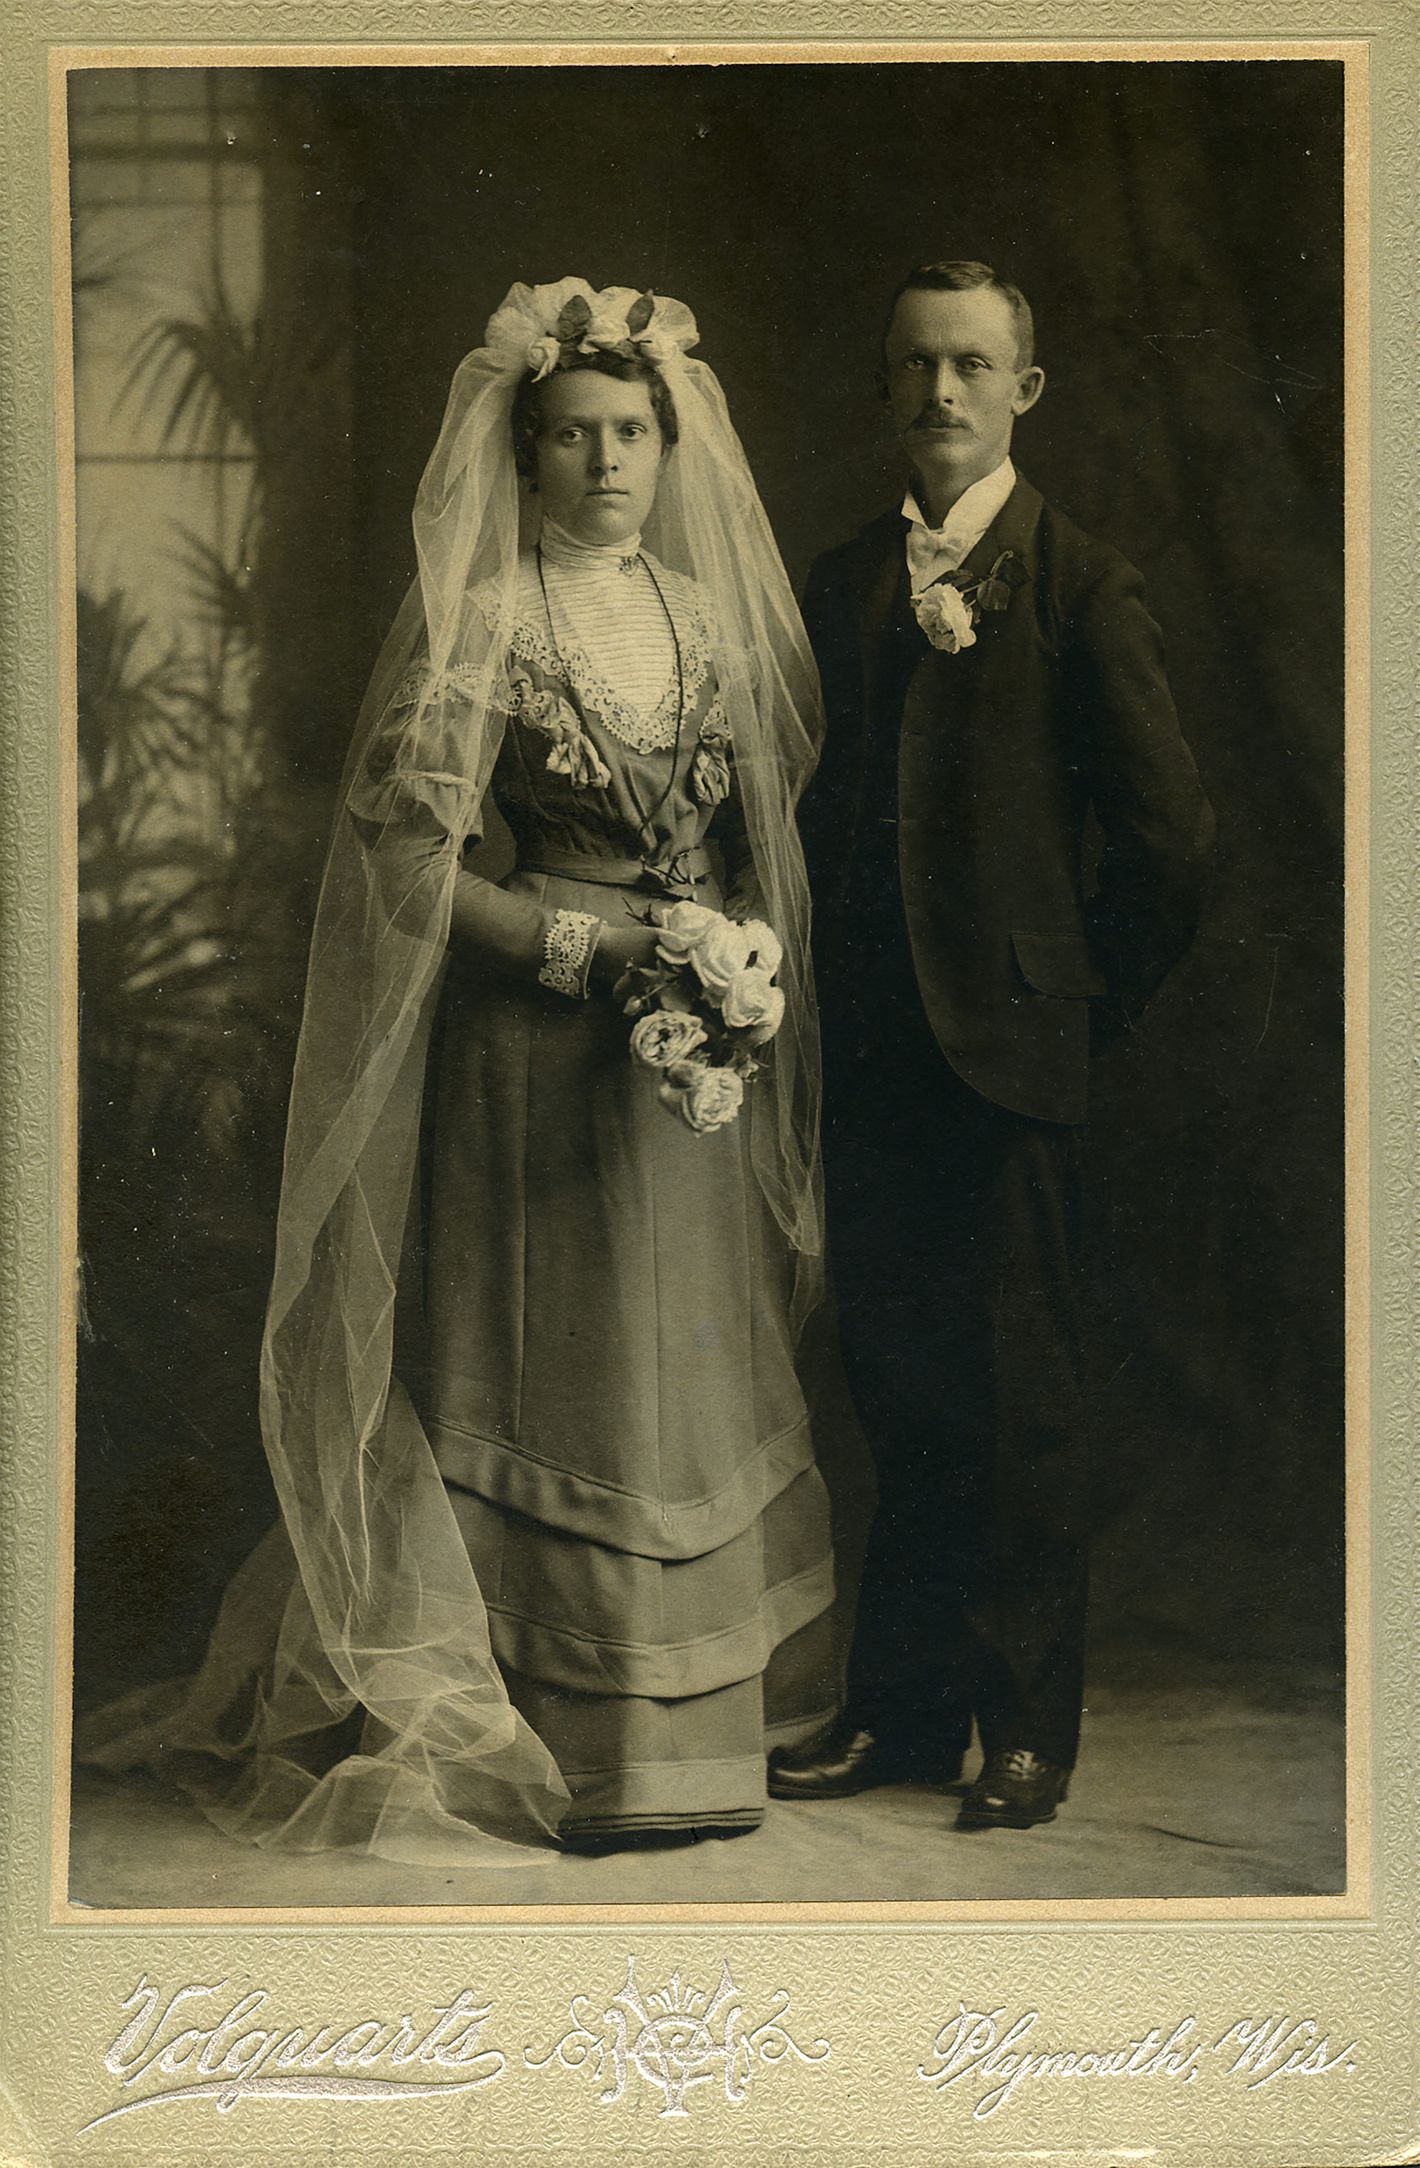 Cabinet Card Photos of 19th-Century Newlyweds